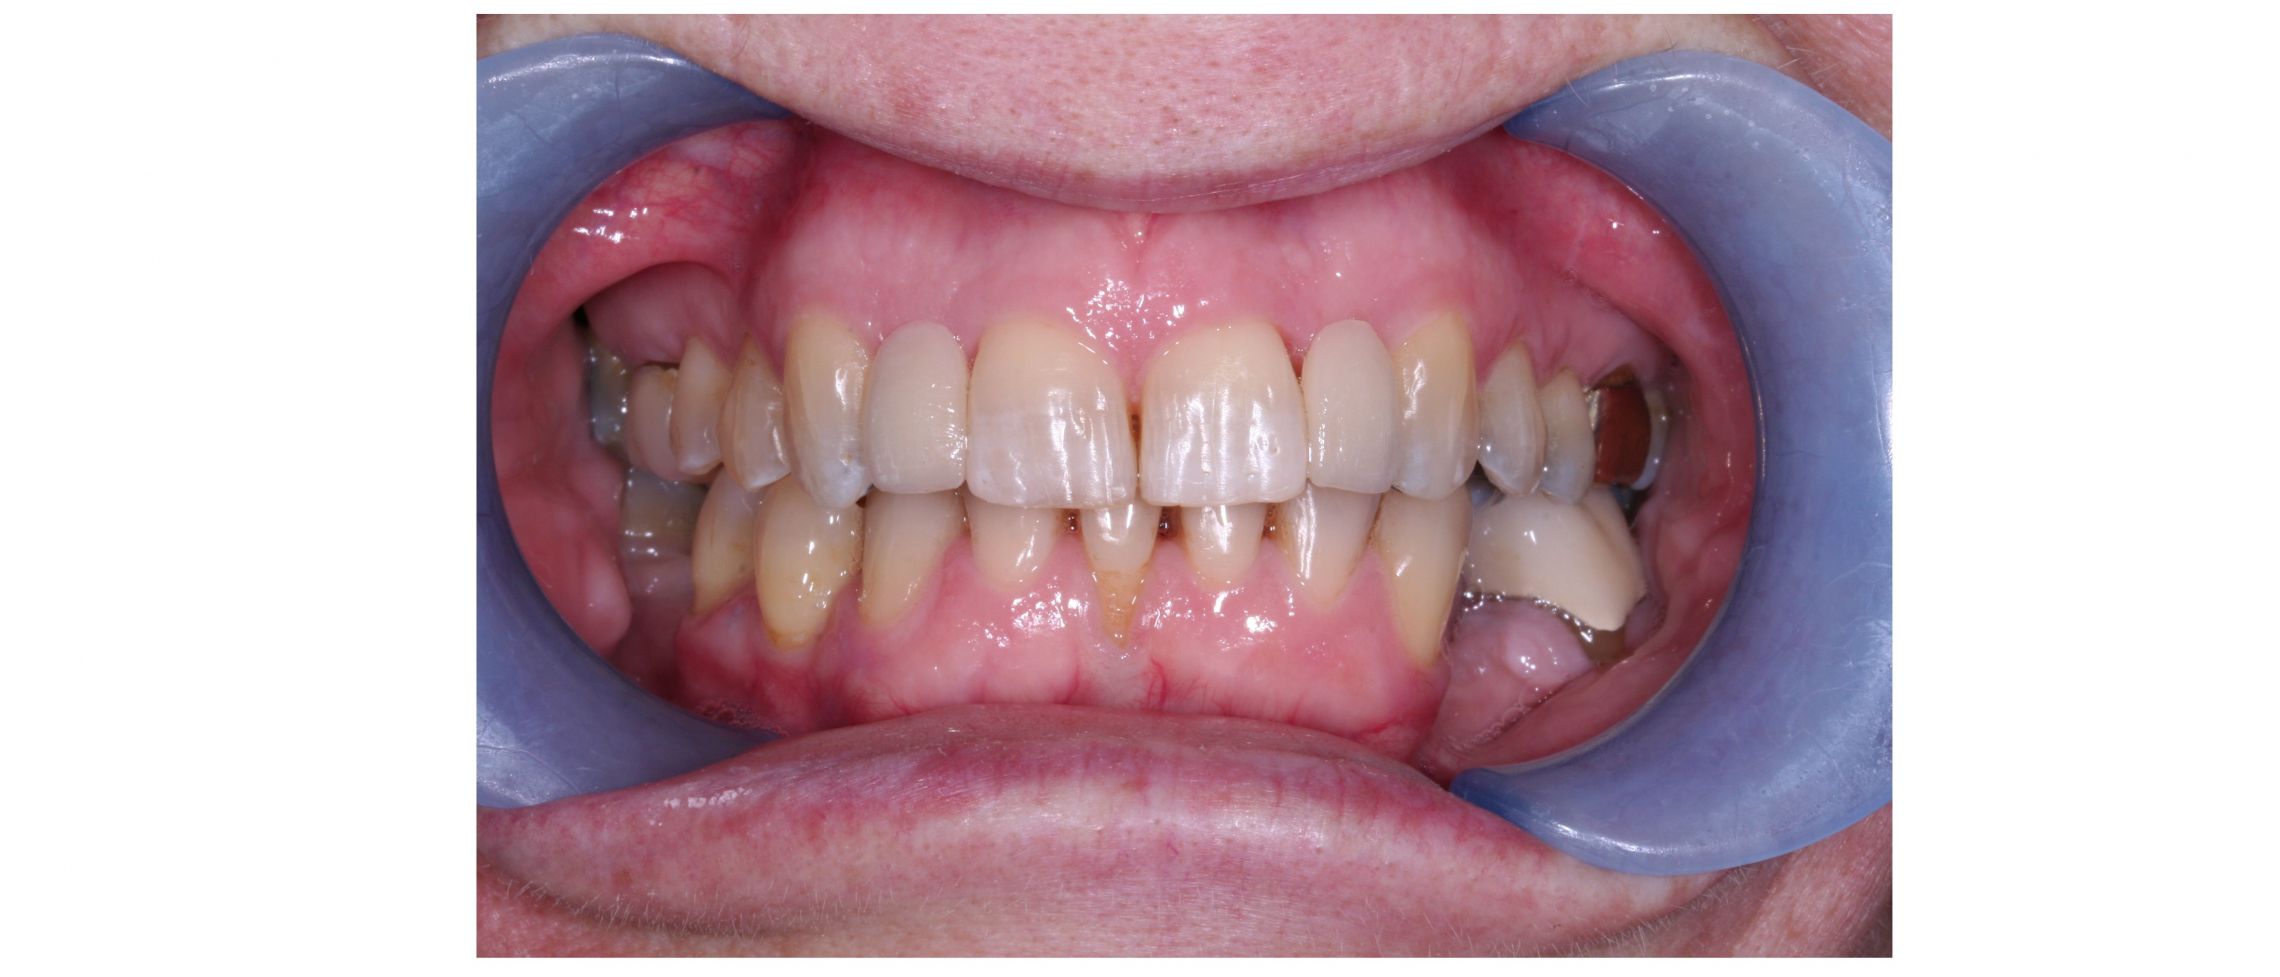 case7 - after treatment